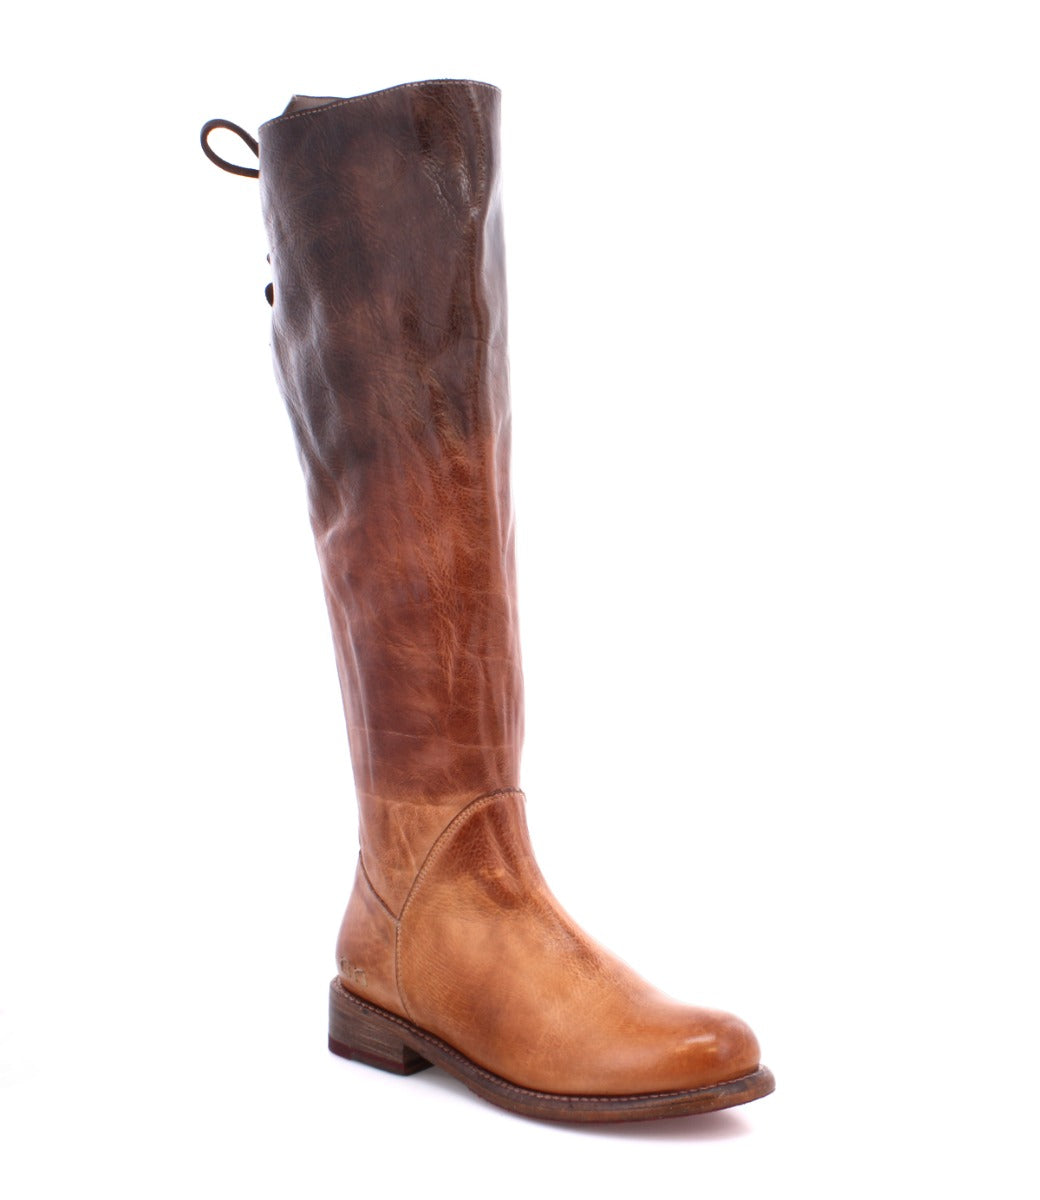 A women's Bed Stu Manchester tan leather boot on a white background.